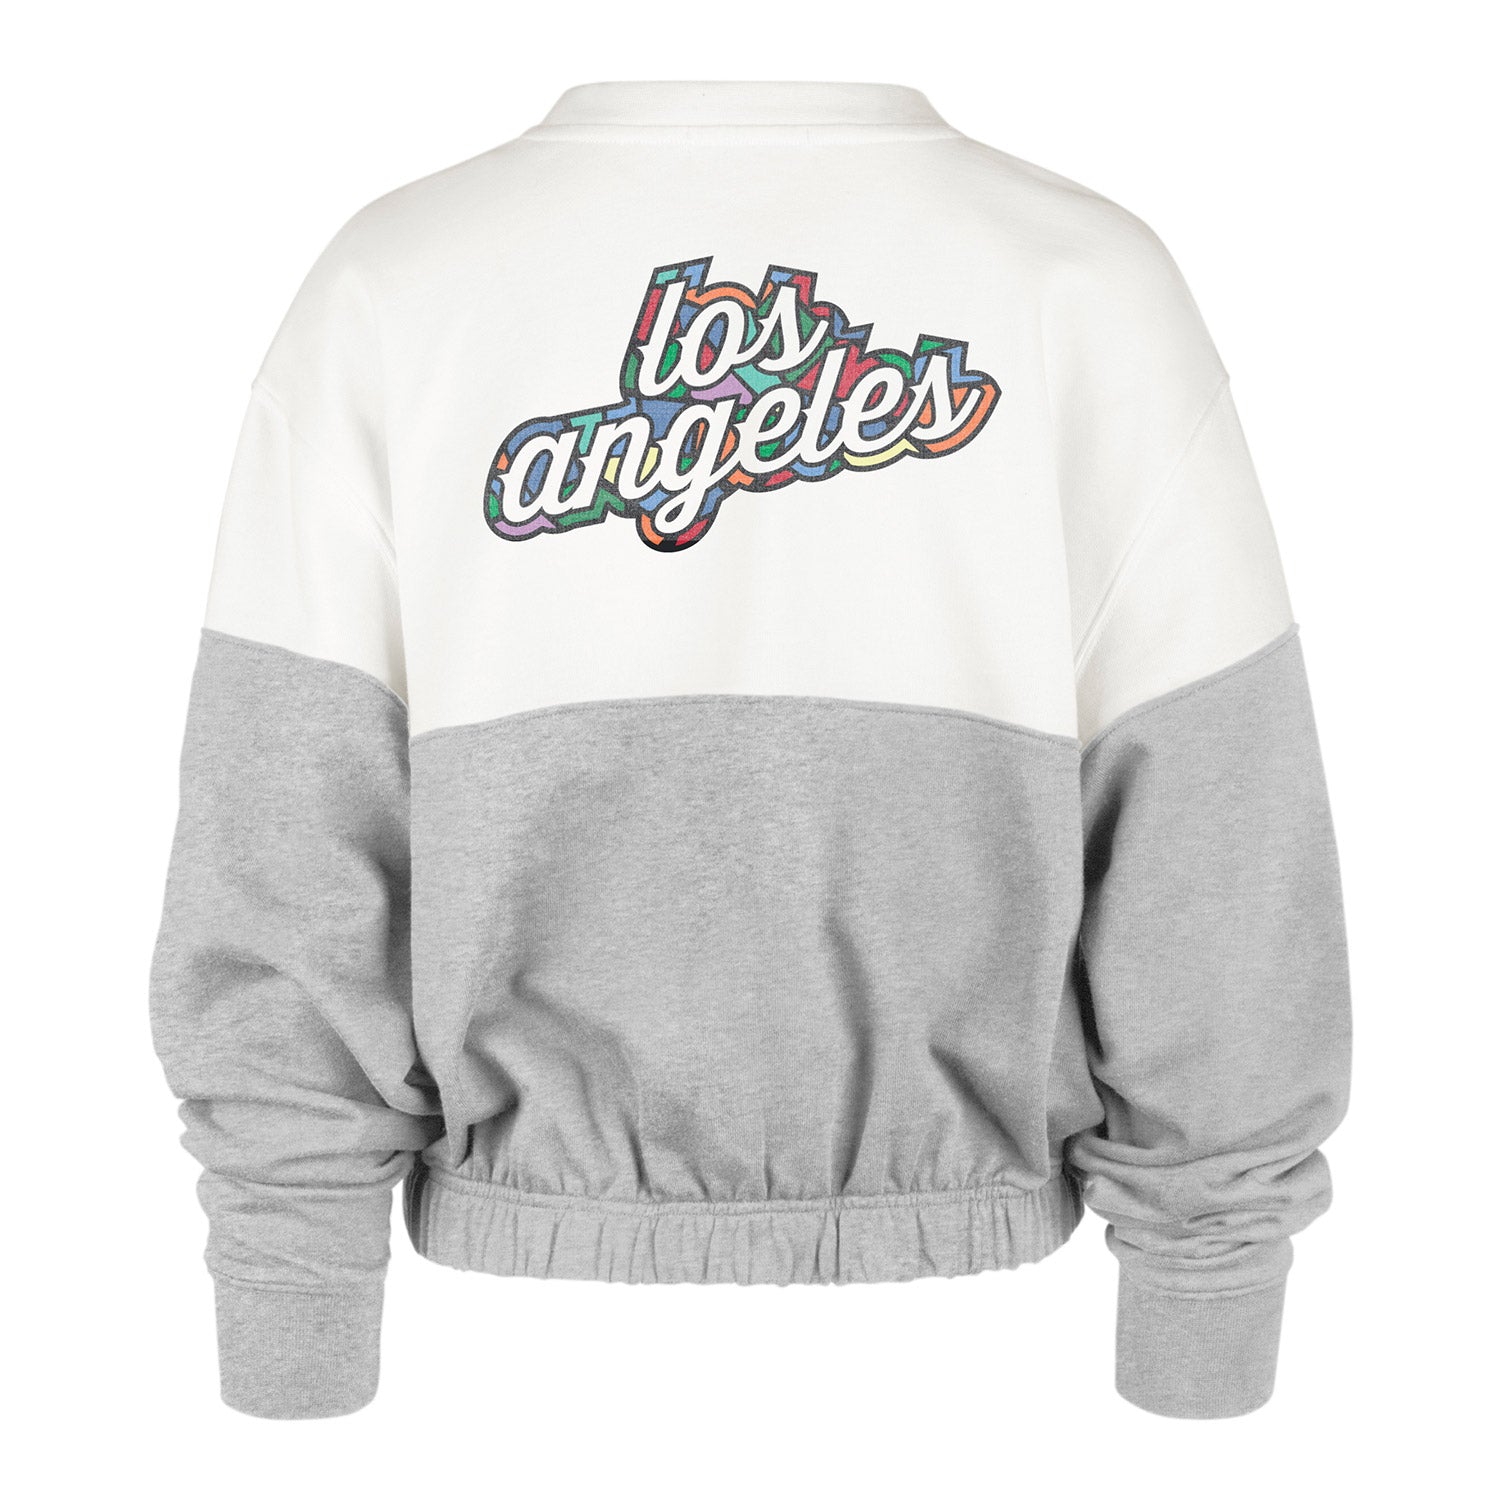 2022-23 Los Angeles Clippers City Edition Shirts, hoodie, sweater